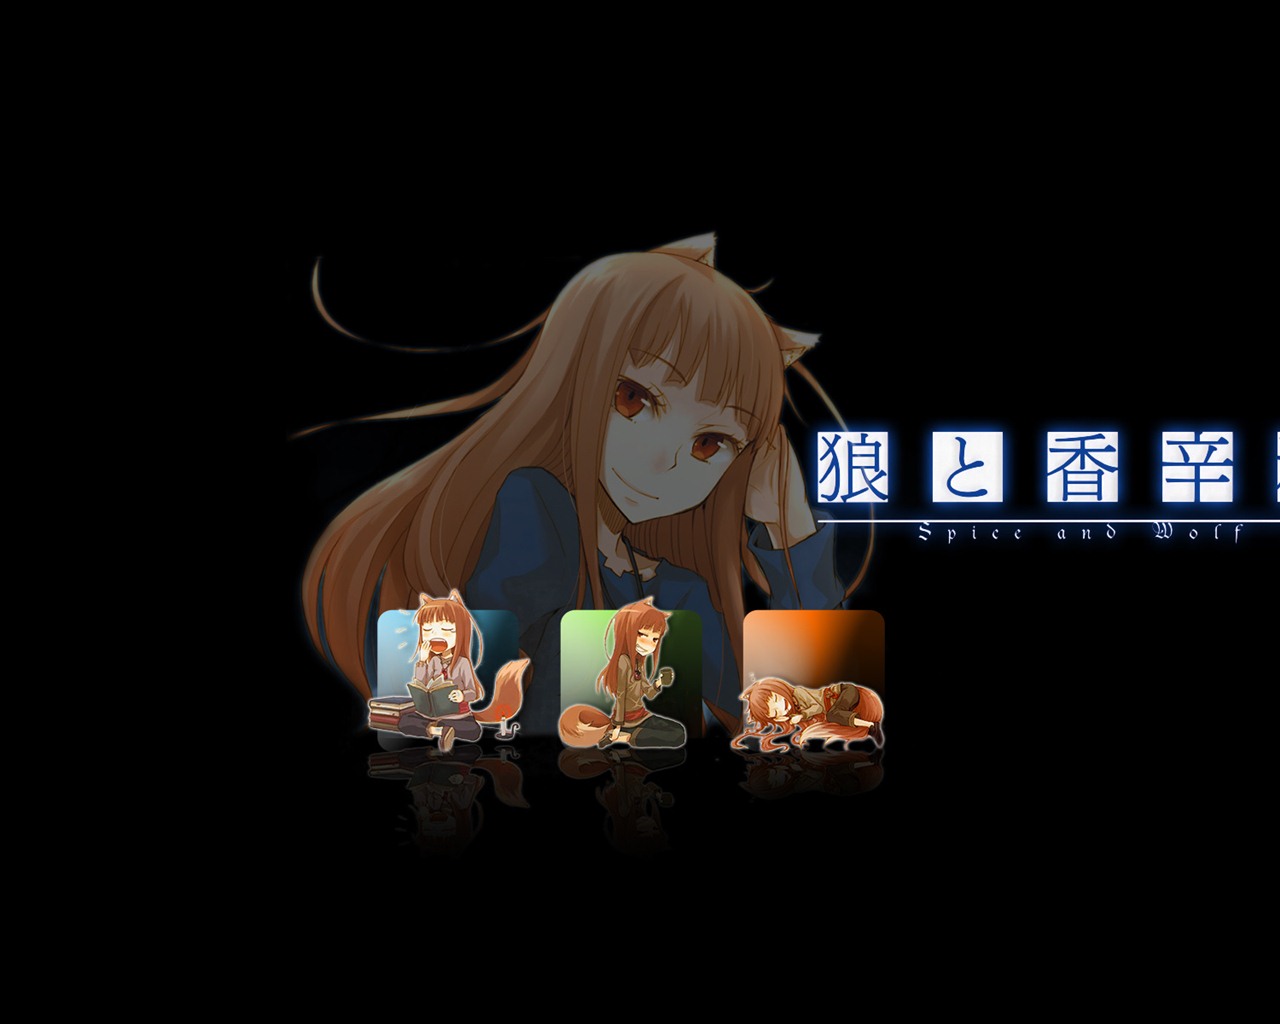 Spice and Wolf HD wallpapers #23 - 1280x1024